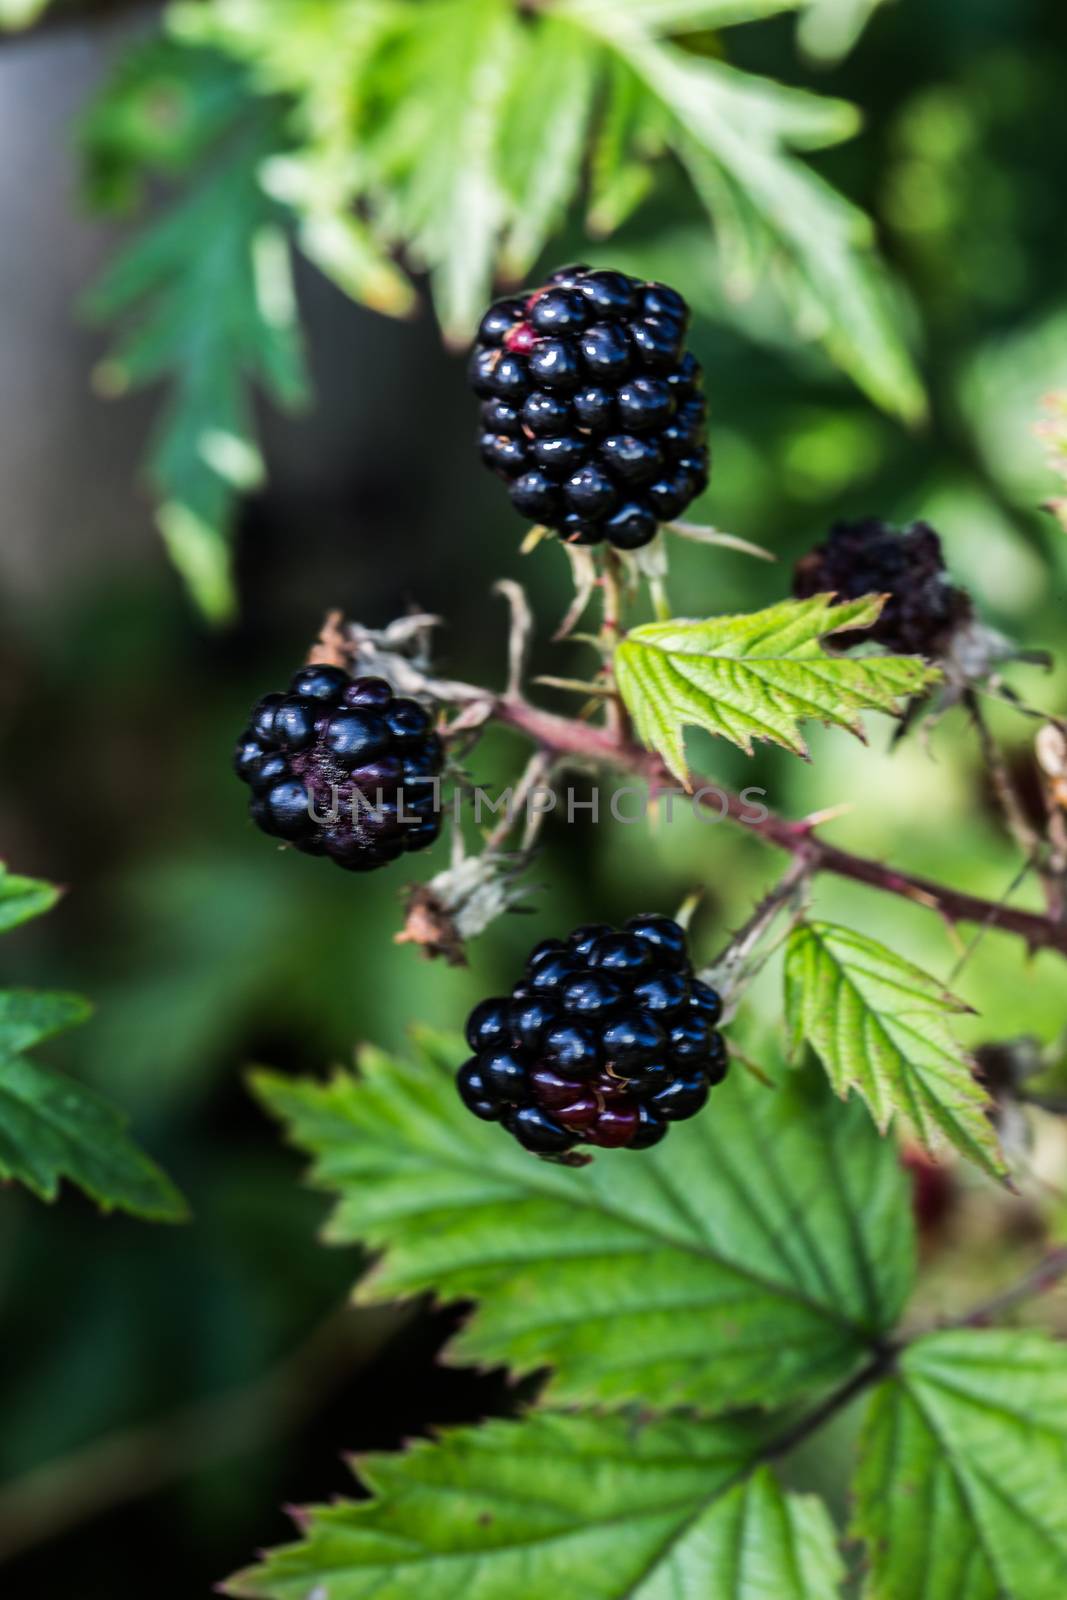 Blackberry bushes with thorns and black fruits by Dr-Lange